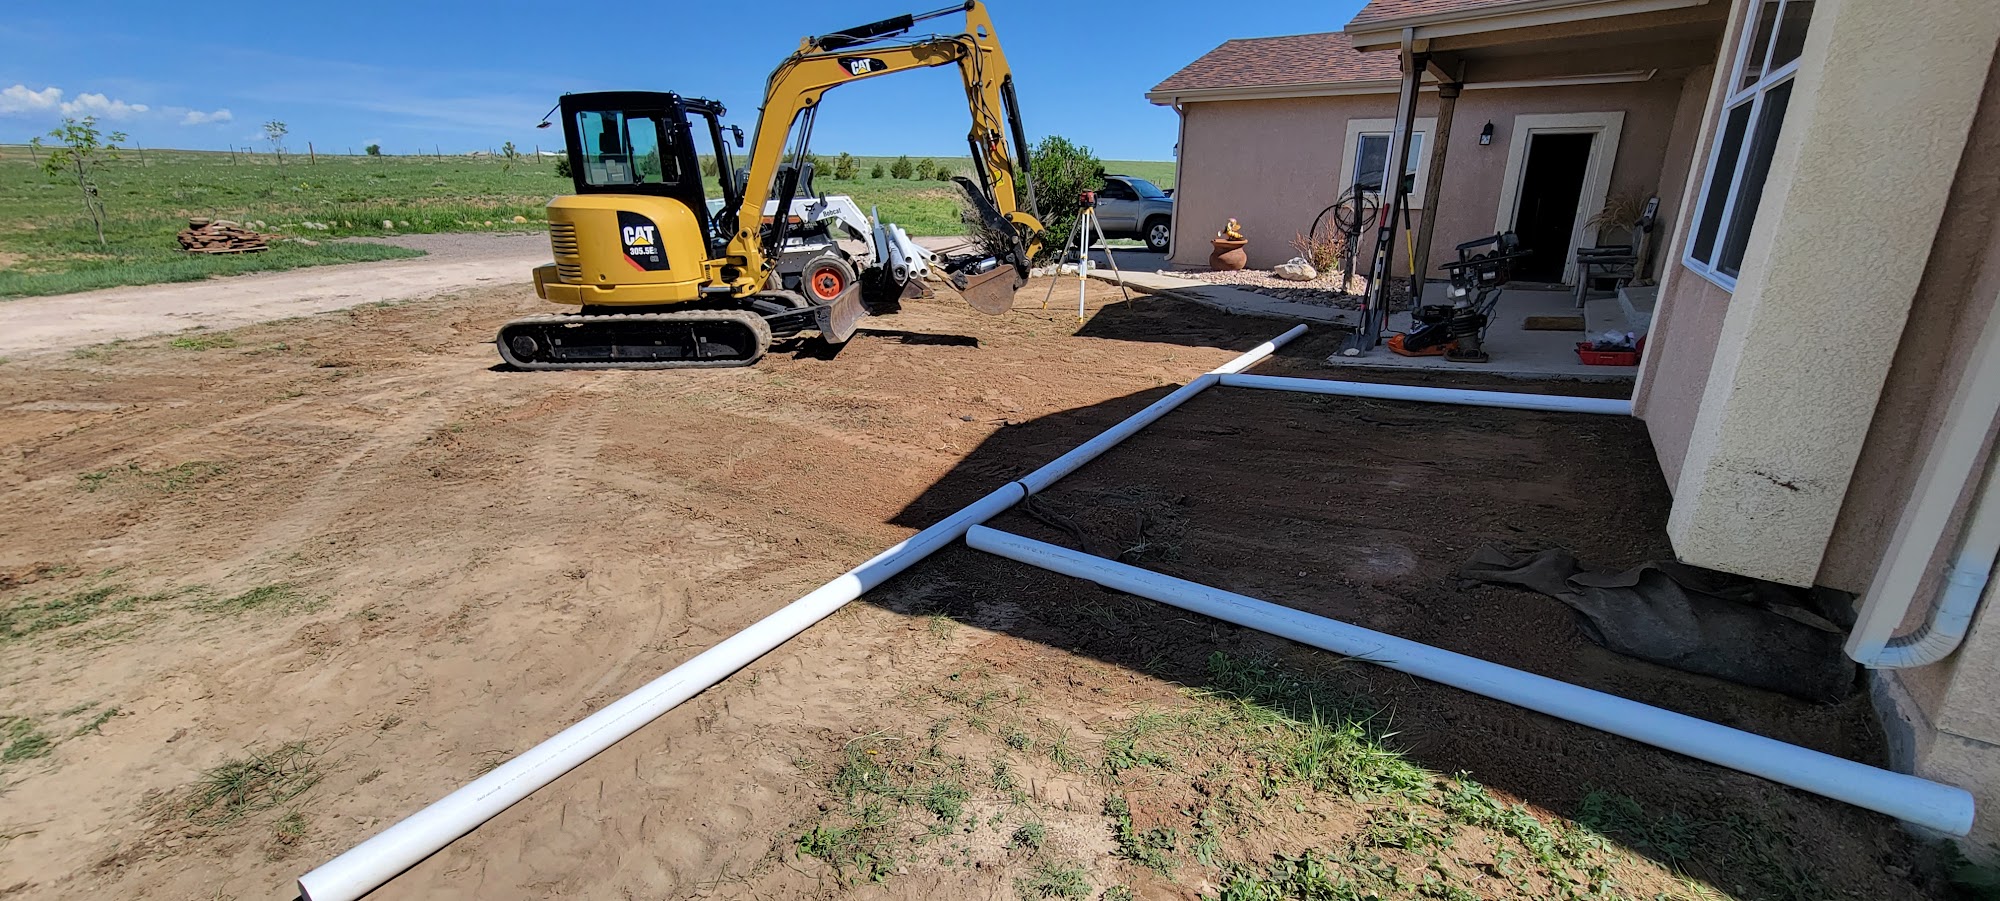 Crush Excavation - Landscaping & Excavating Pros 50511 E Jewell Rd, Bennett Colorado 80102